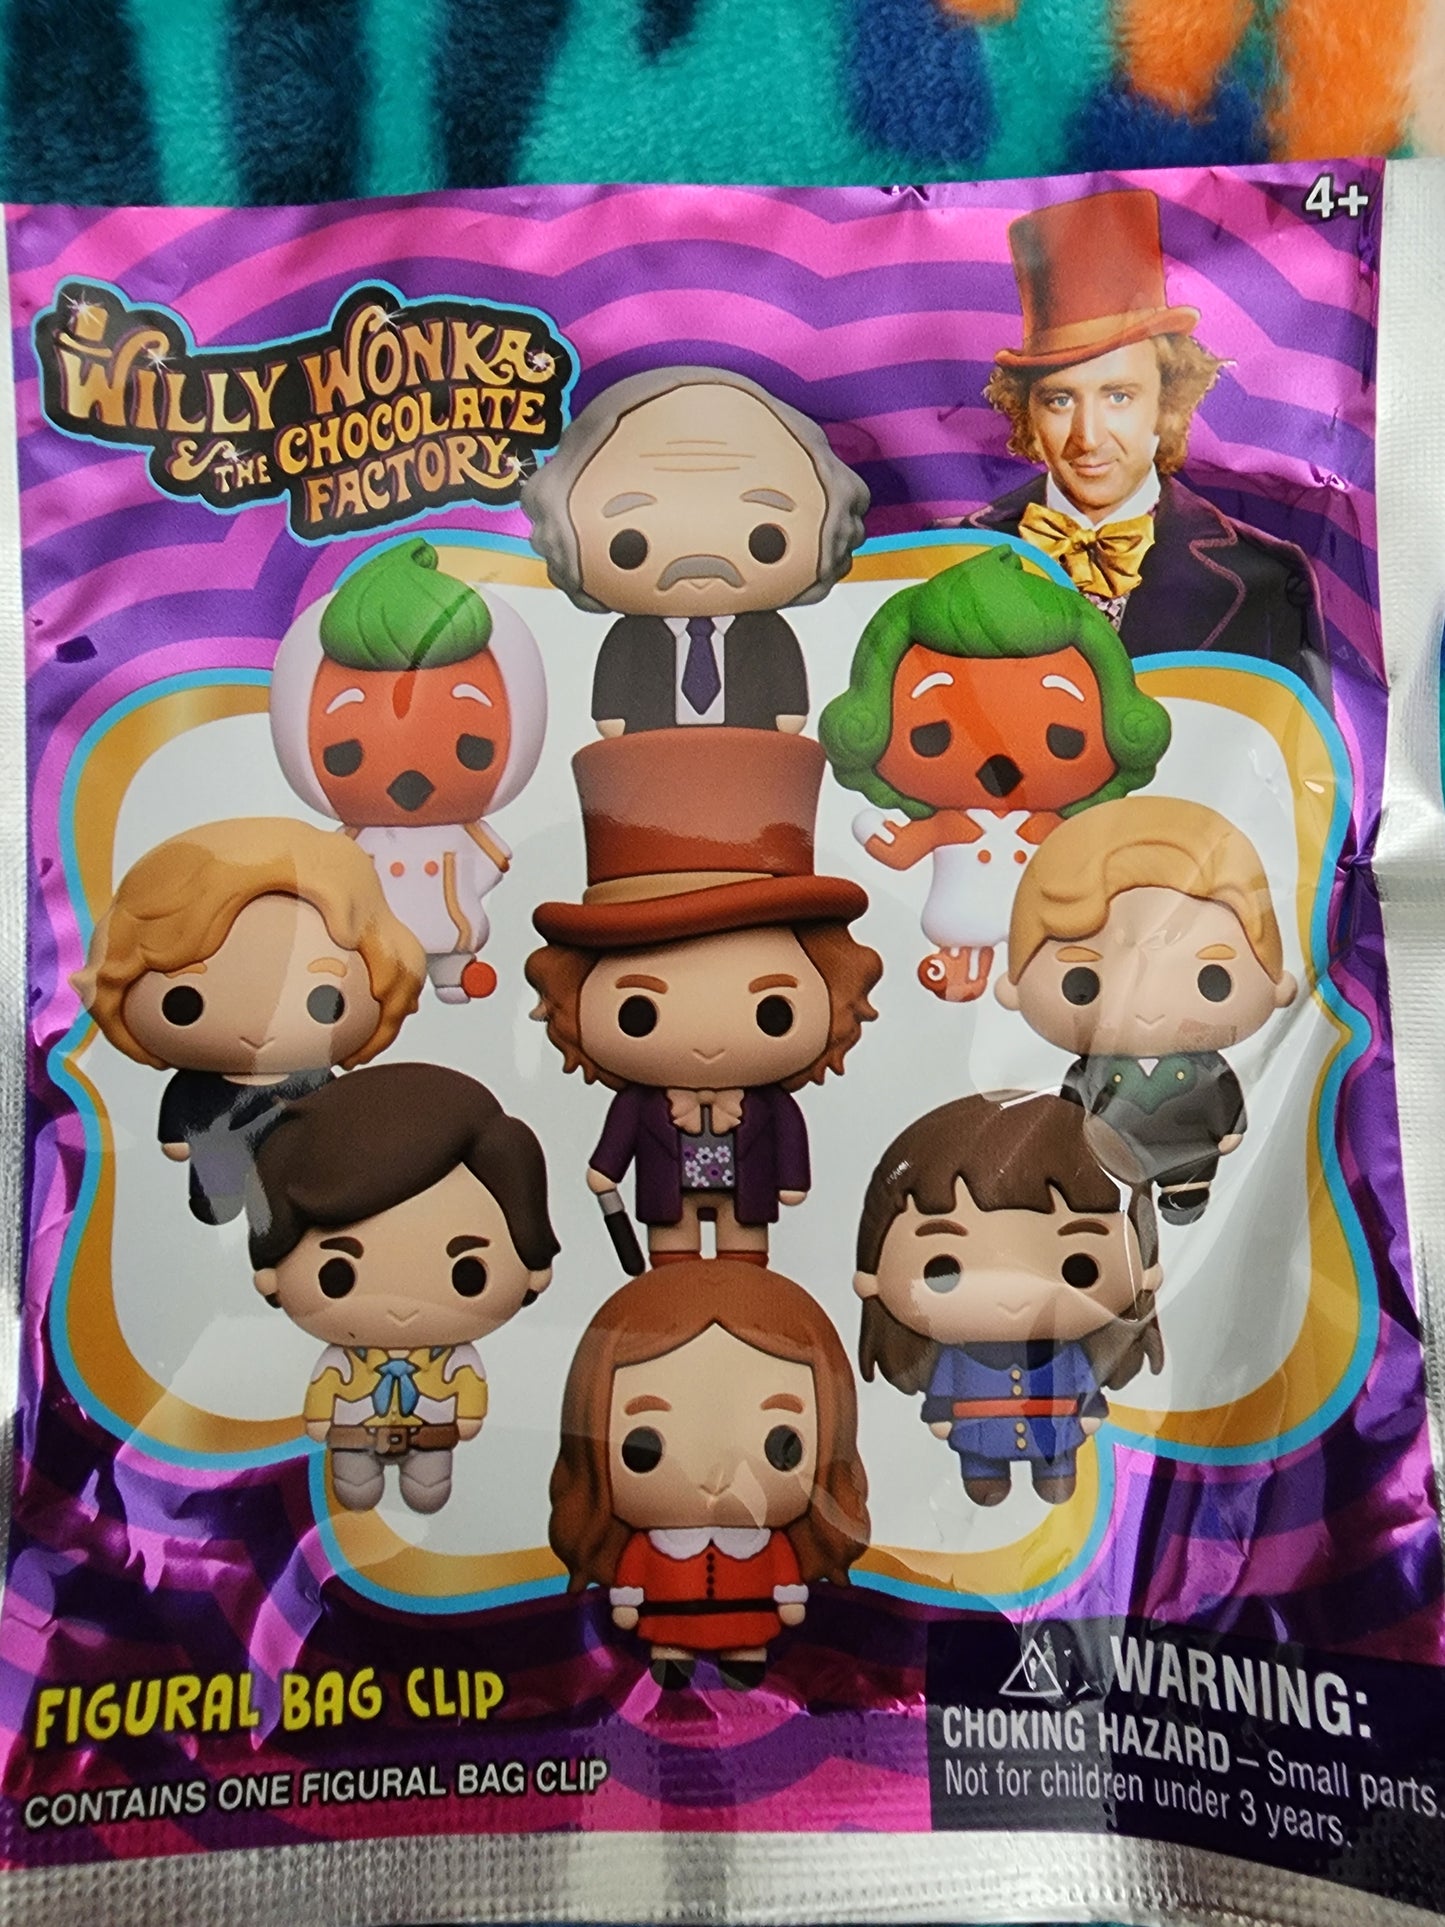 Willy Wonka & the Chocolate Factory Mystery Bag Clips